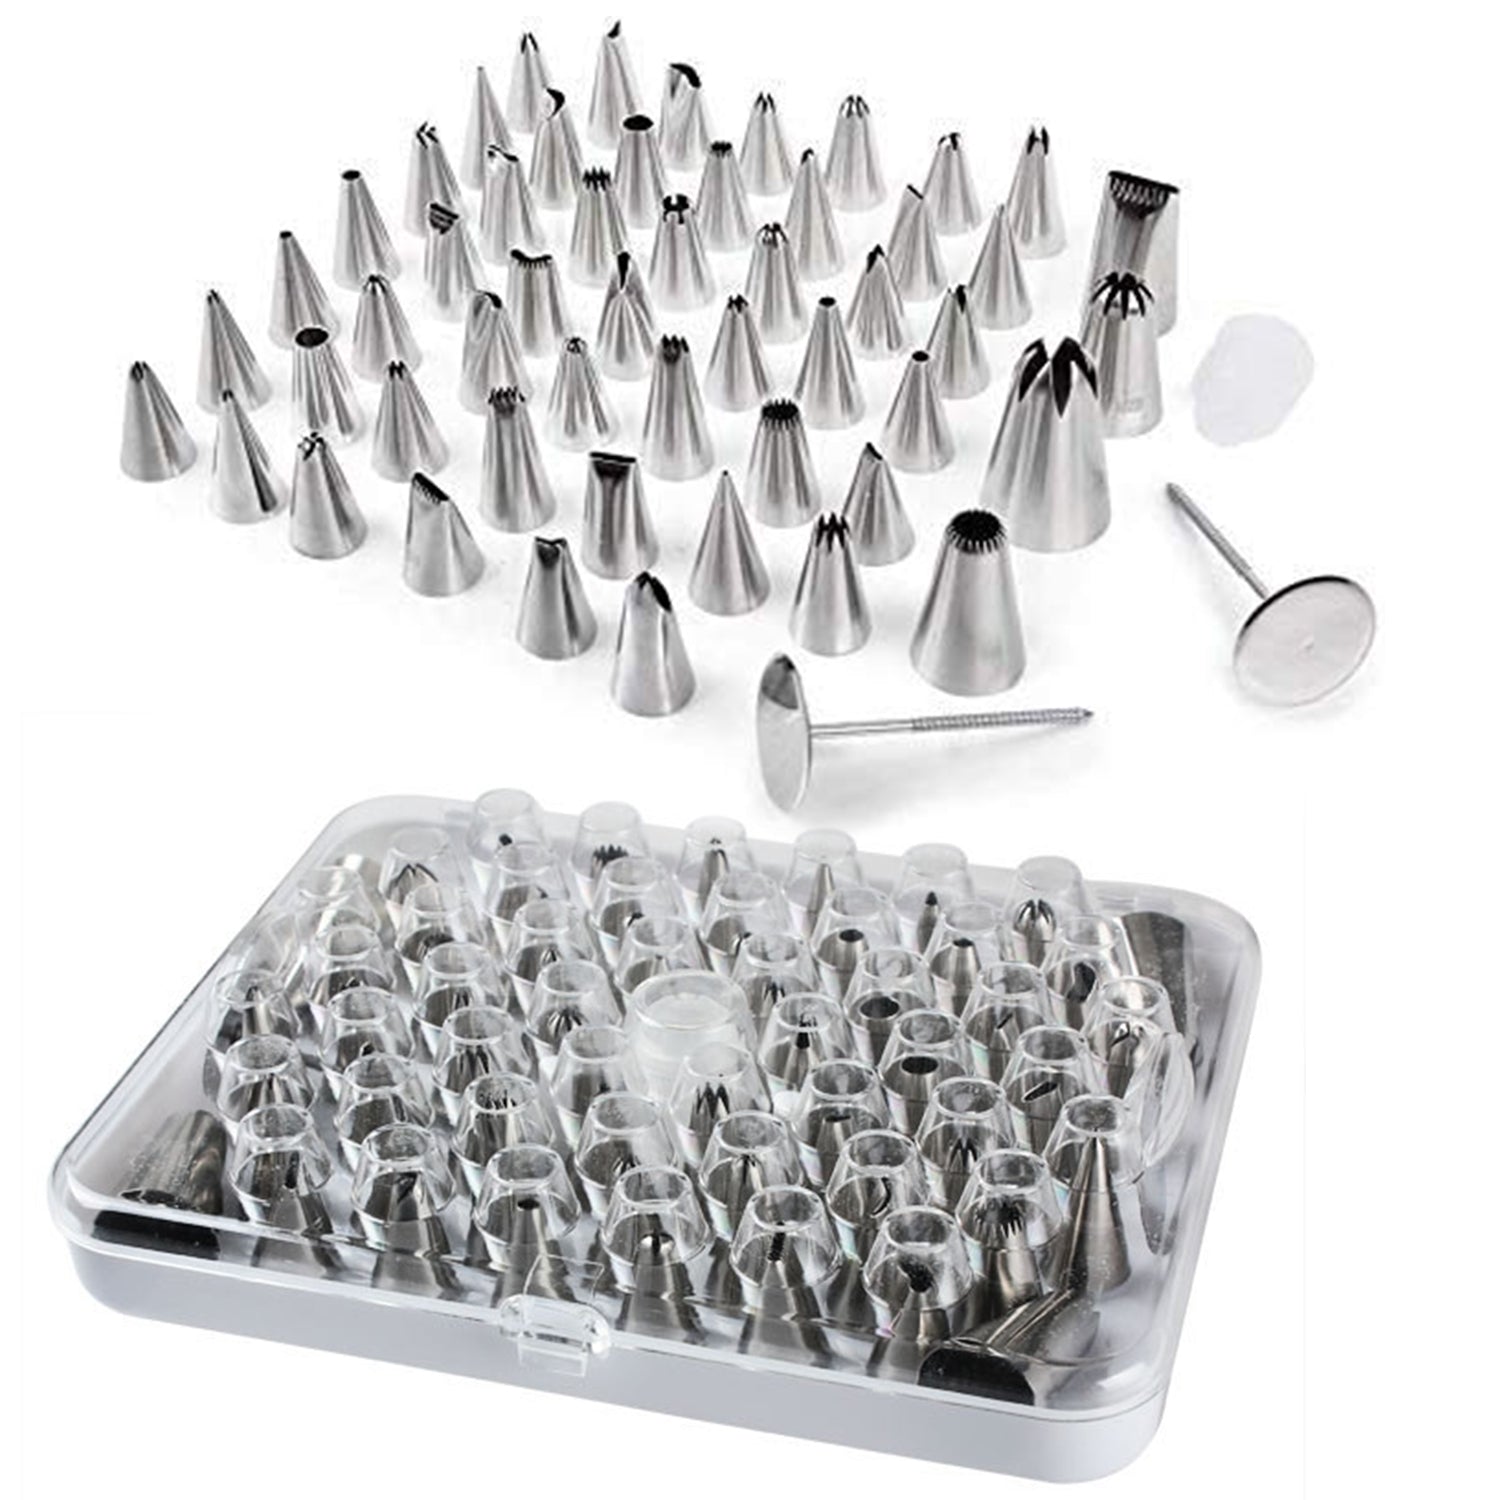 4722 Cake Nozzle Set and Cake Nozzle Tool Used for Making Cake and Pastry Decorations. DeoDap